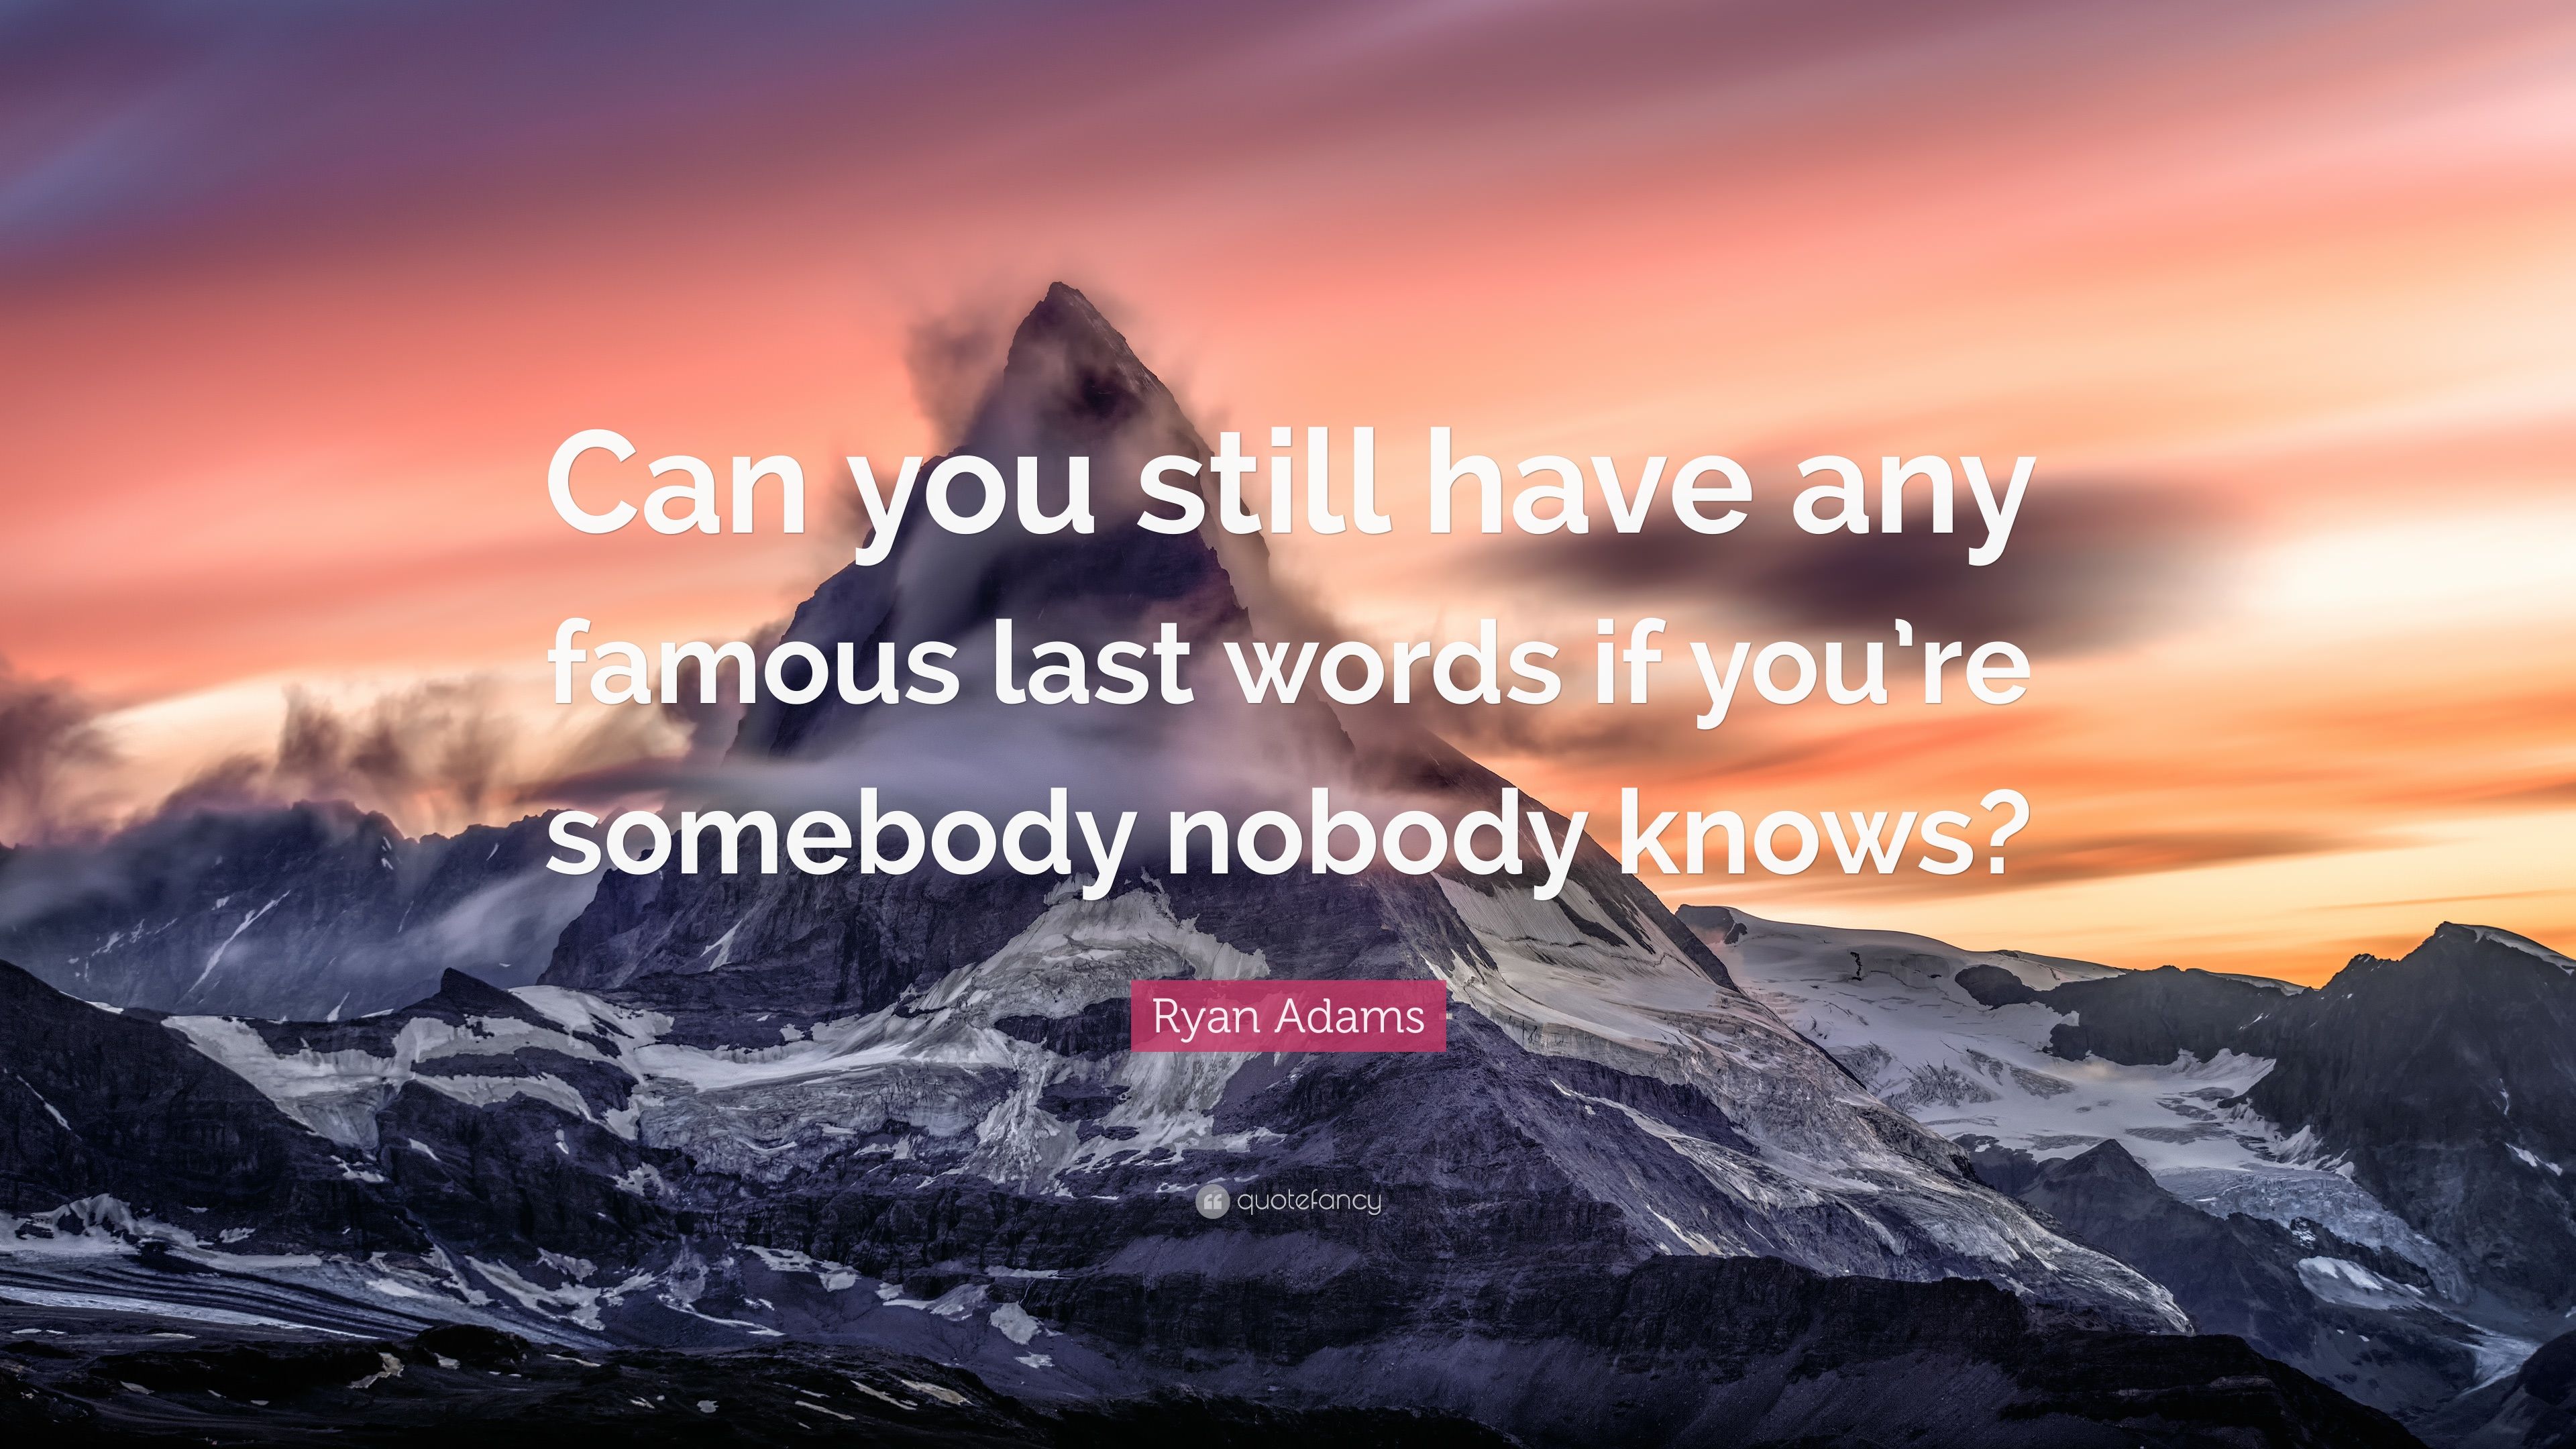 Ryan Adams Quote: “Can you still have any famous last words if you're somebody nobody